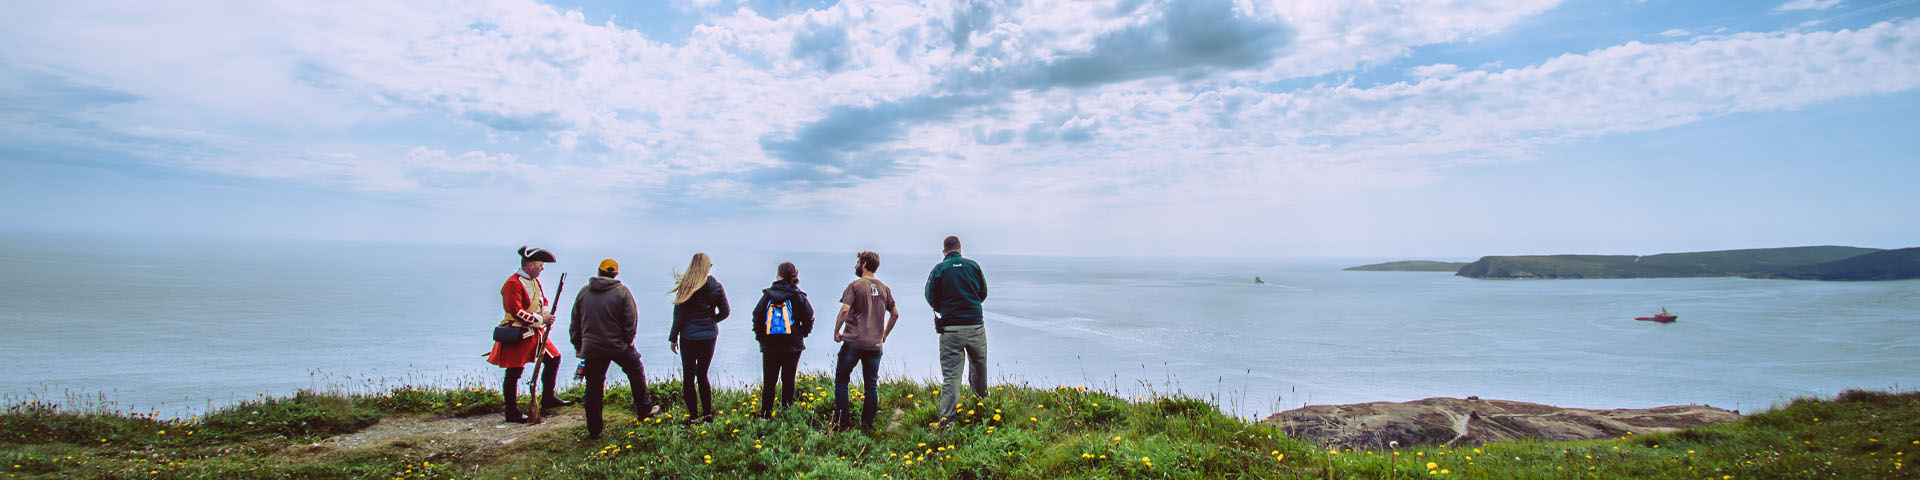 a group of 6 people standing on a coastal edge, overlooking the ocean